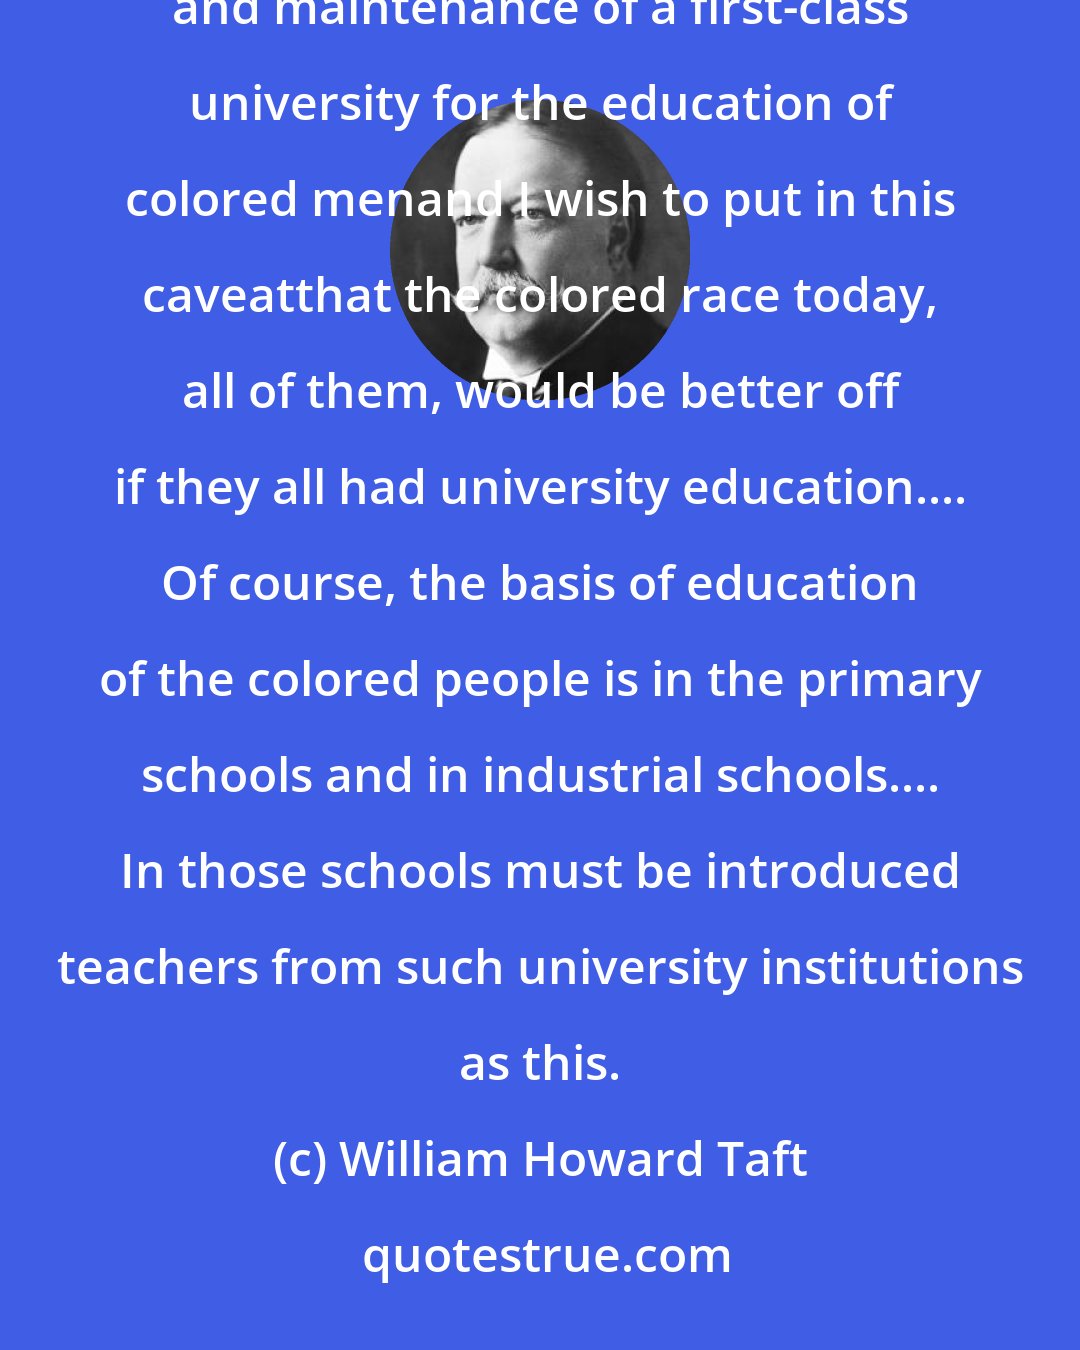 William Howard Taft: It is fitting that the Government of the United States should assume the obligation of the establishment and maintenance of a first-class university for the education of colored menand I wish to put in this caveatthat the colored race today, all of them, would be better off if they all had university education.... Of course, the basis of education of the colored people is in the primary schools and in industrial schools.... In those schools must be introduced teachers from such university institutions as this.